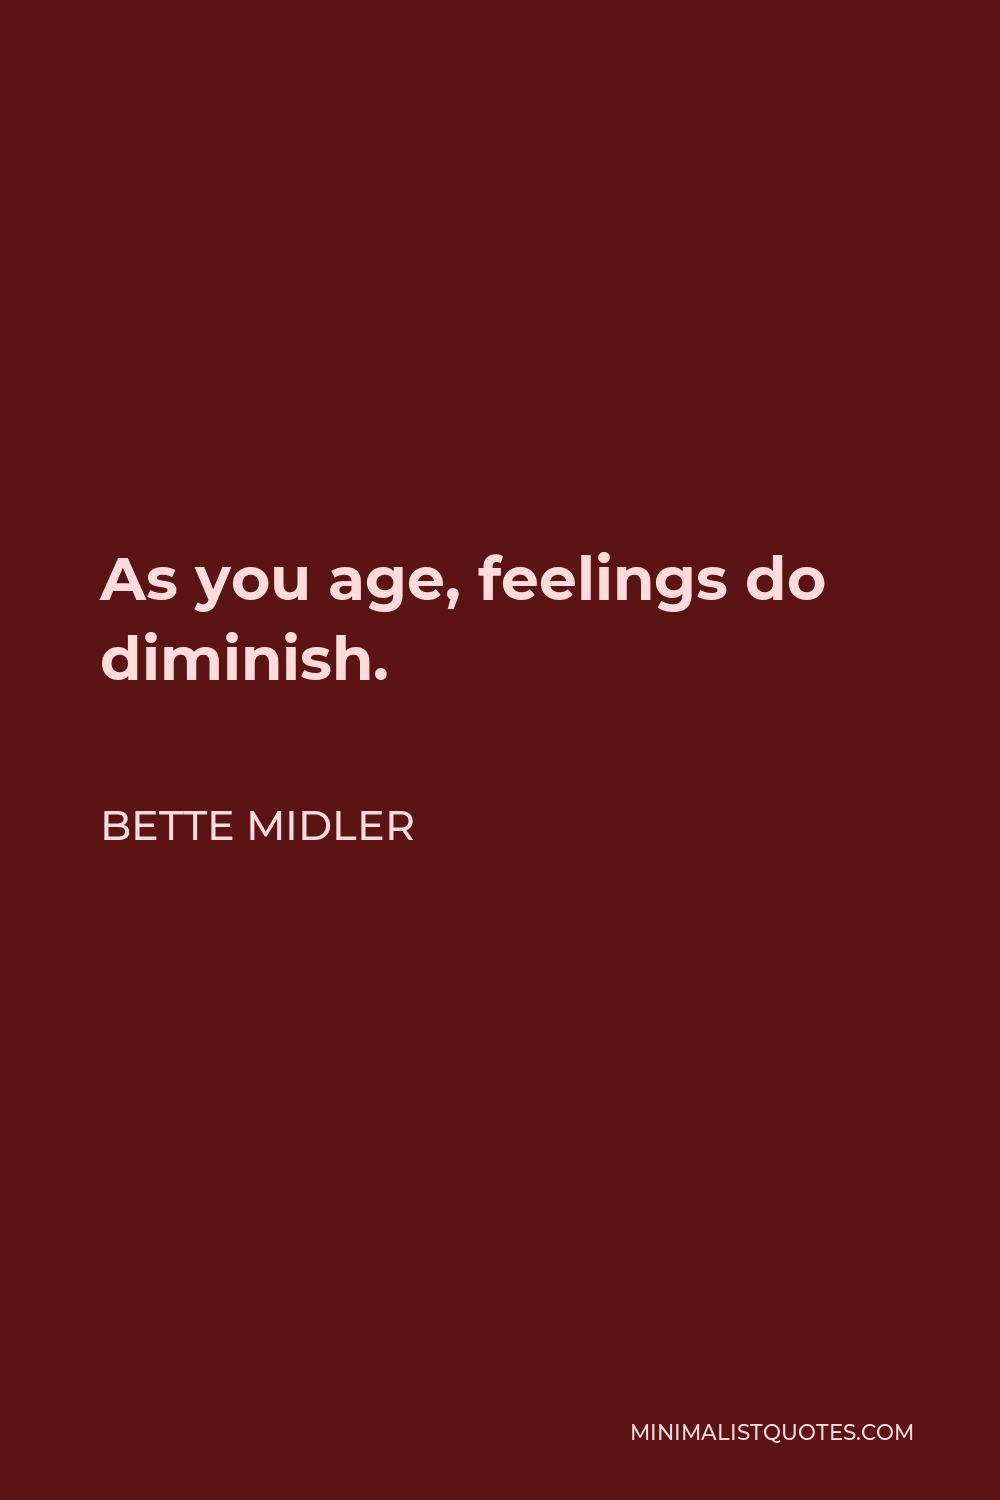 Bette Midler Quote - As you age, feelings do diminish.